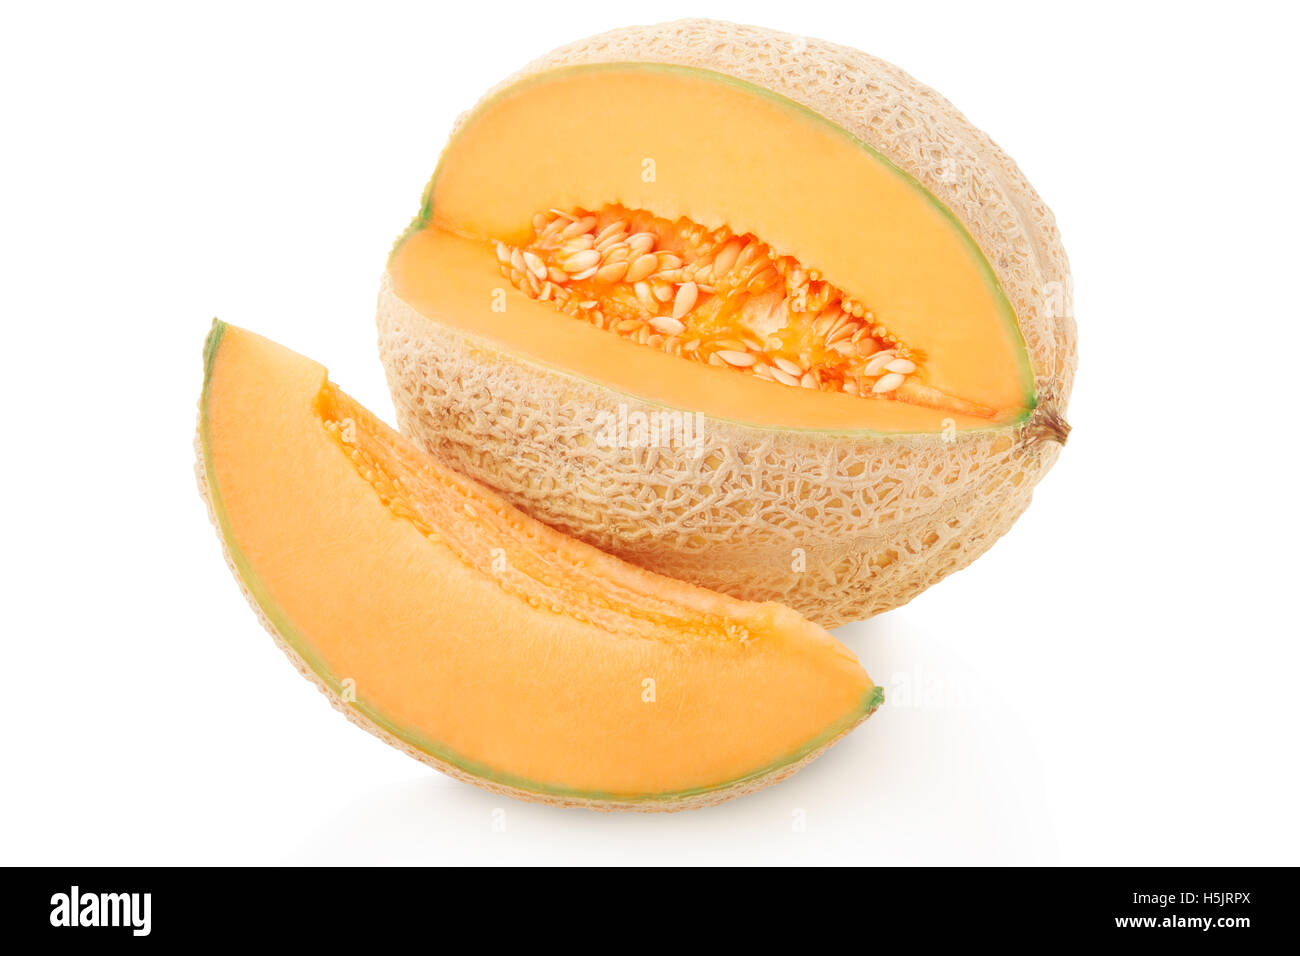 Cantaloupe melon and slice on white, clipping path Stock Photo